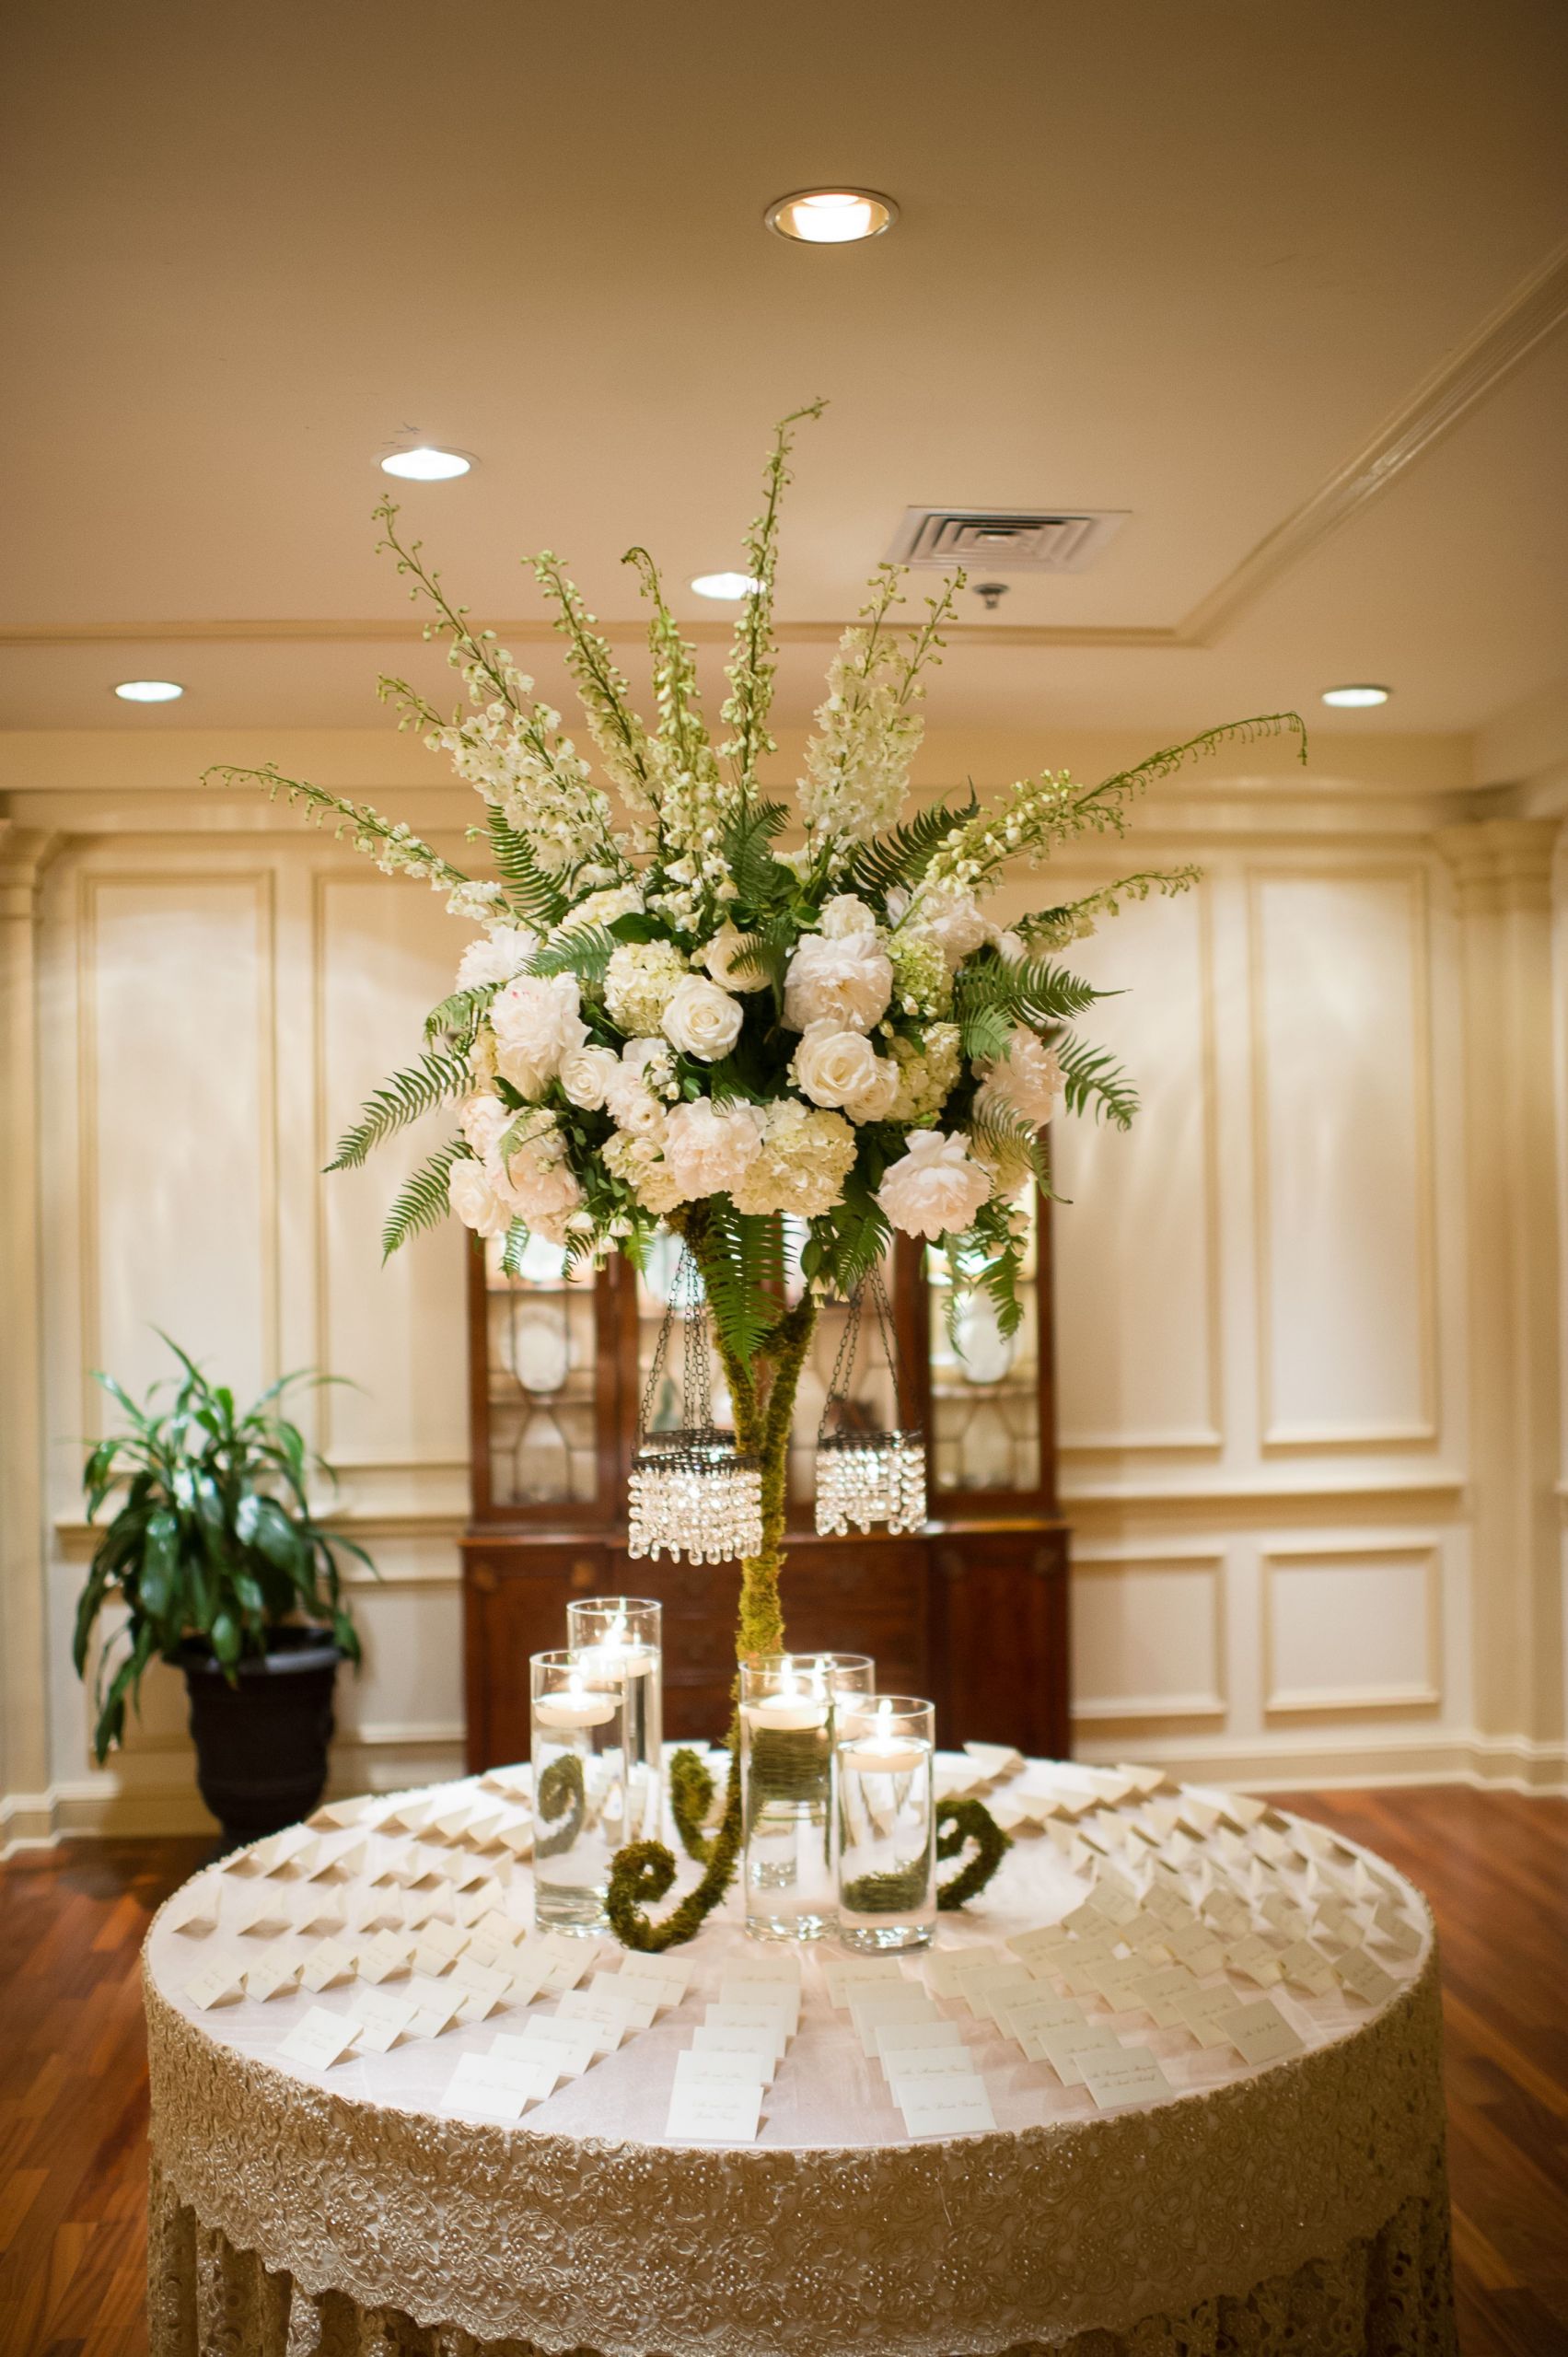 Wedding Reception Flower Arrangements
 Tall Flower Arrangement With Ivory Roses and Delphiniums